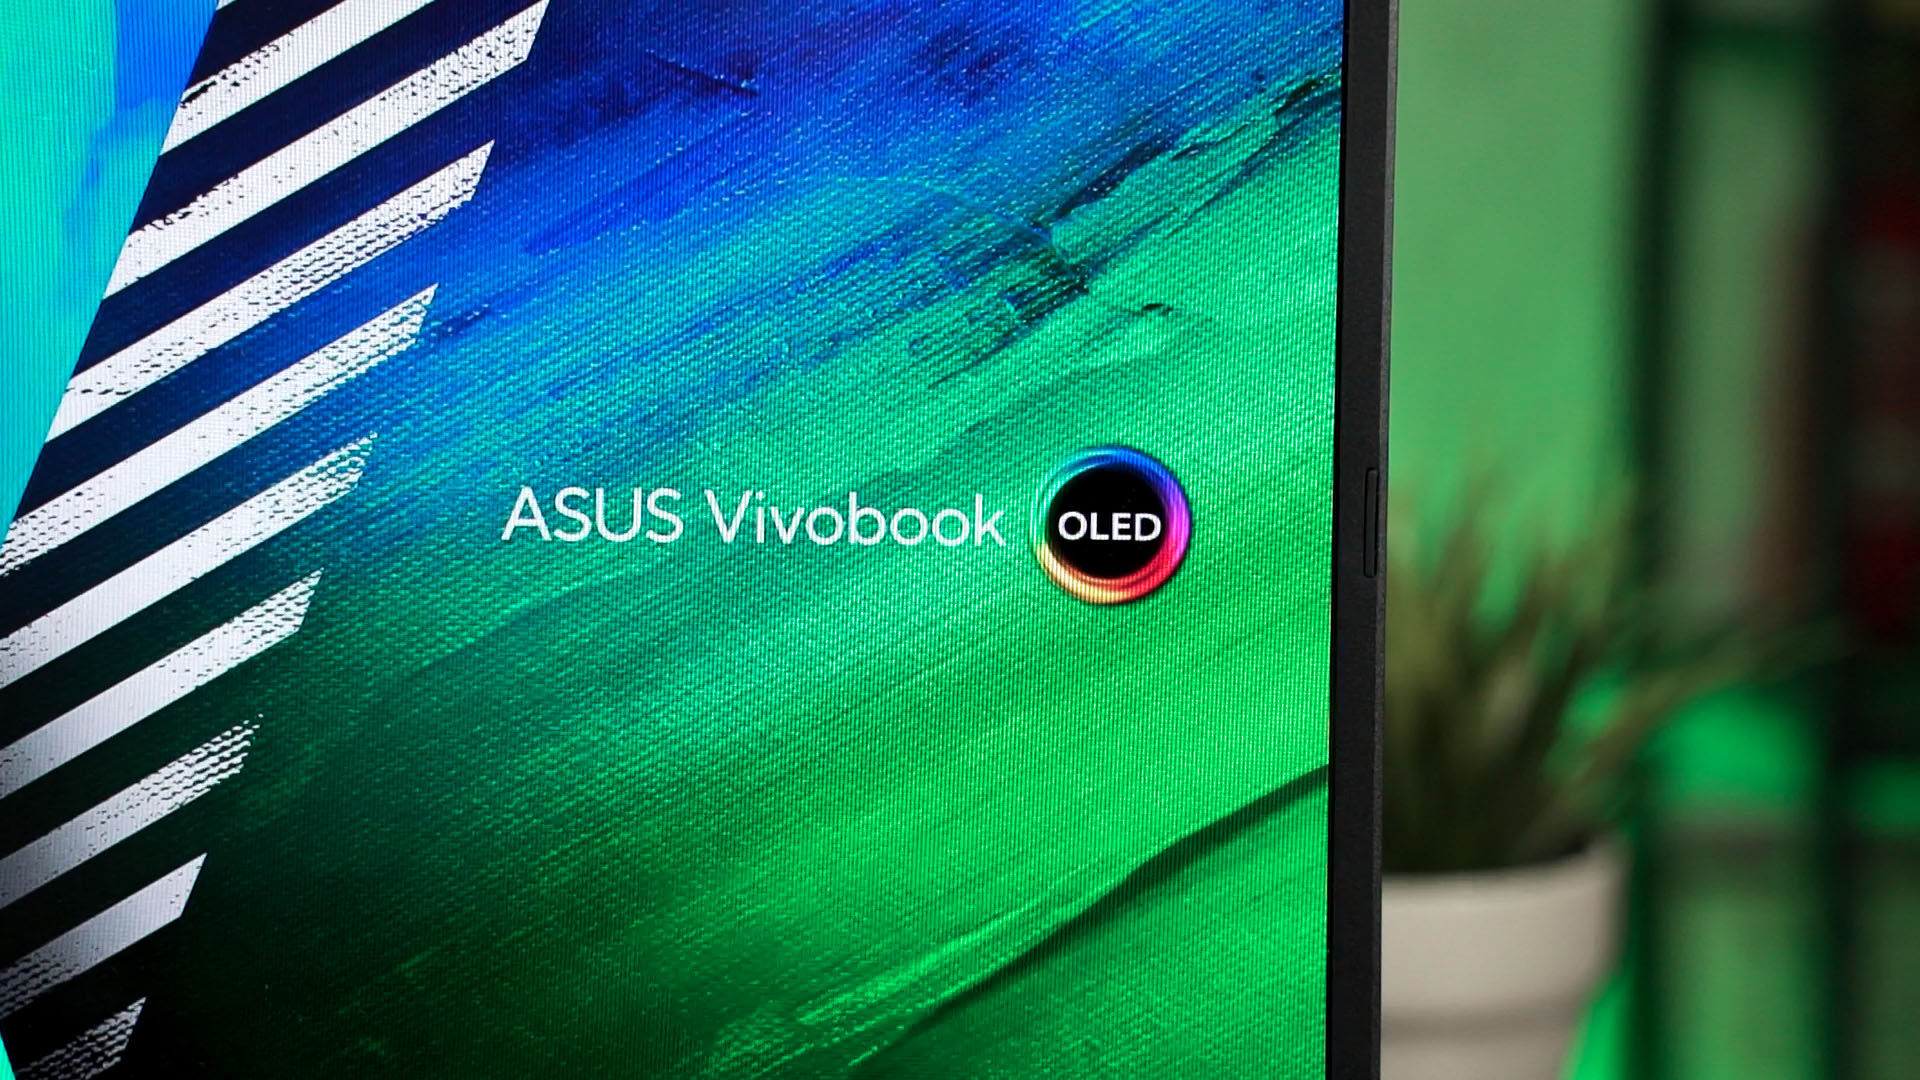 Portable OLED gaming is now possible with the ASUS Vivobook Pro 15